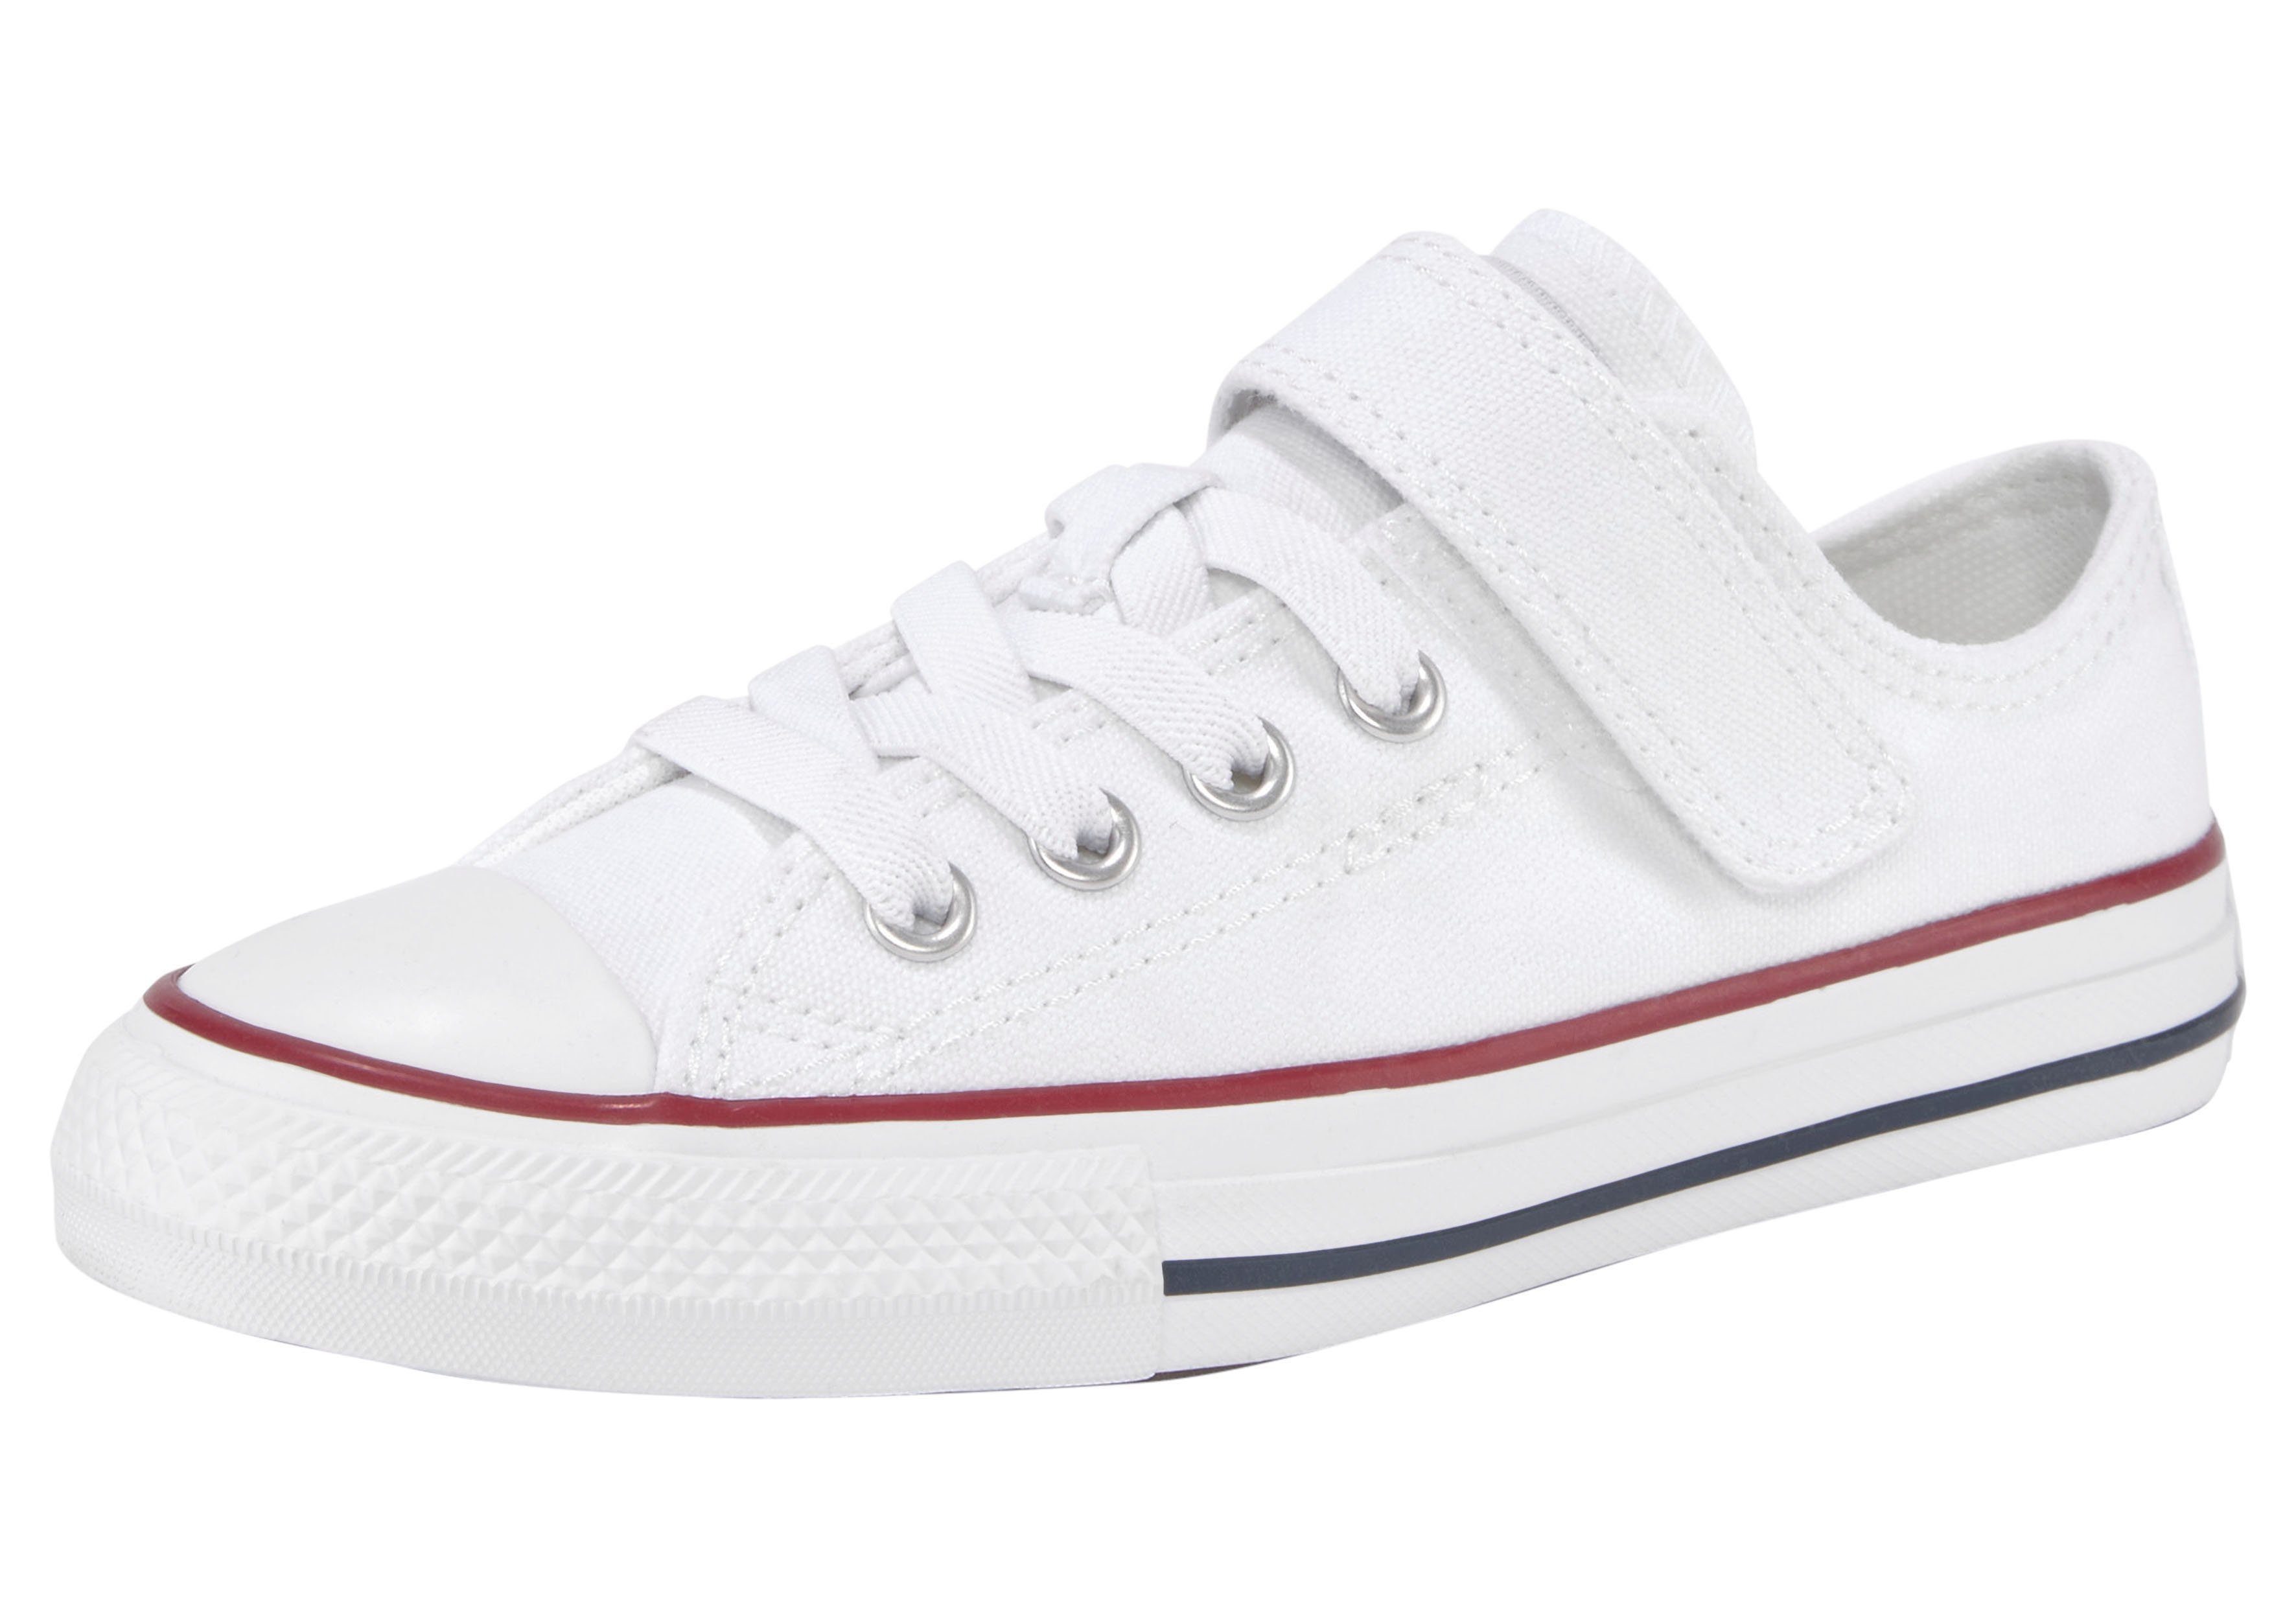 Converse »CHUCK TAYLOR ALL STAR 1V EASY-ON Ox« Sneaker online kaufen | OTTO